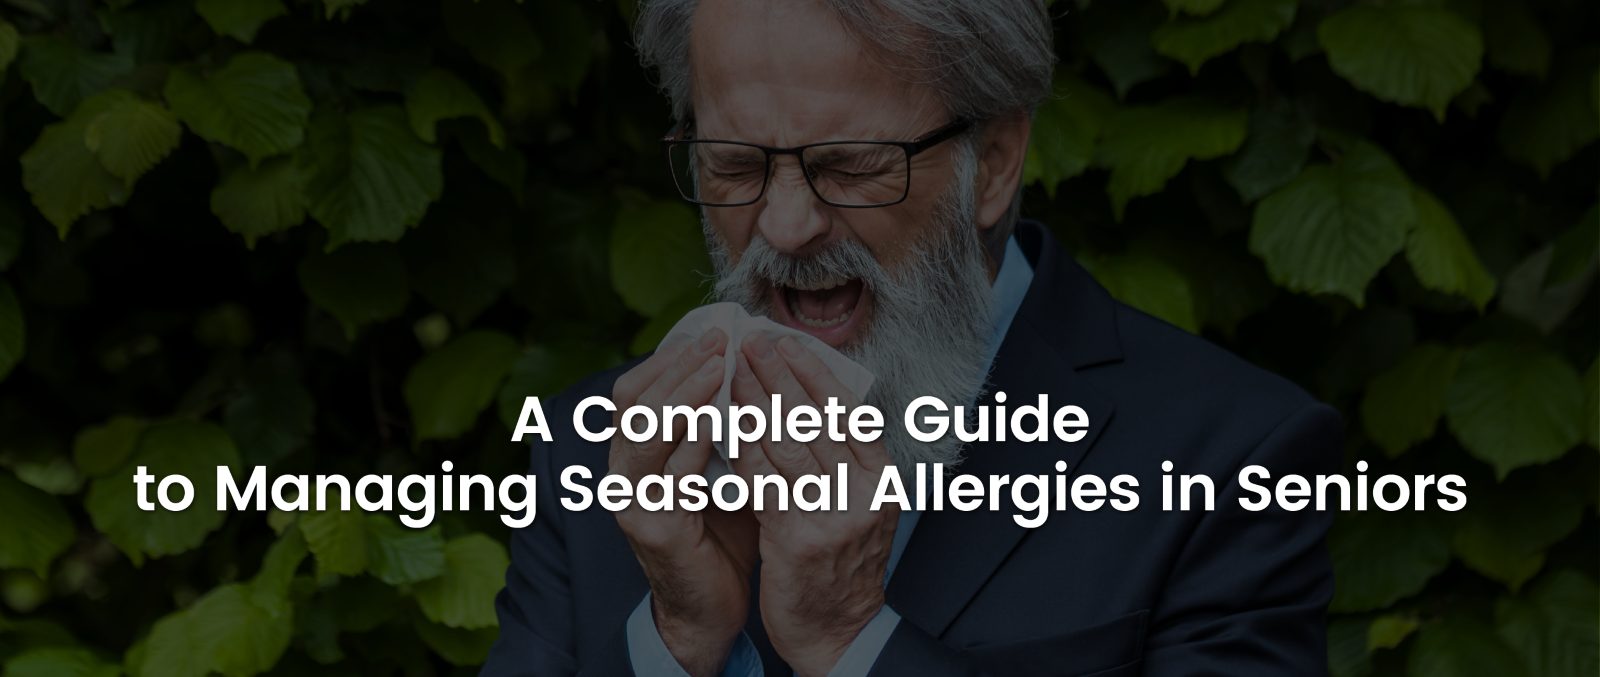 A Complete Guide to Managing Seasonal Allergies in Seniors | Banner Image